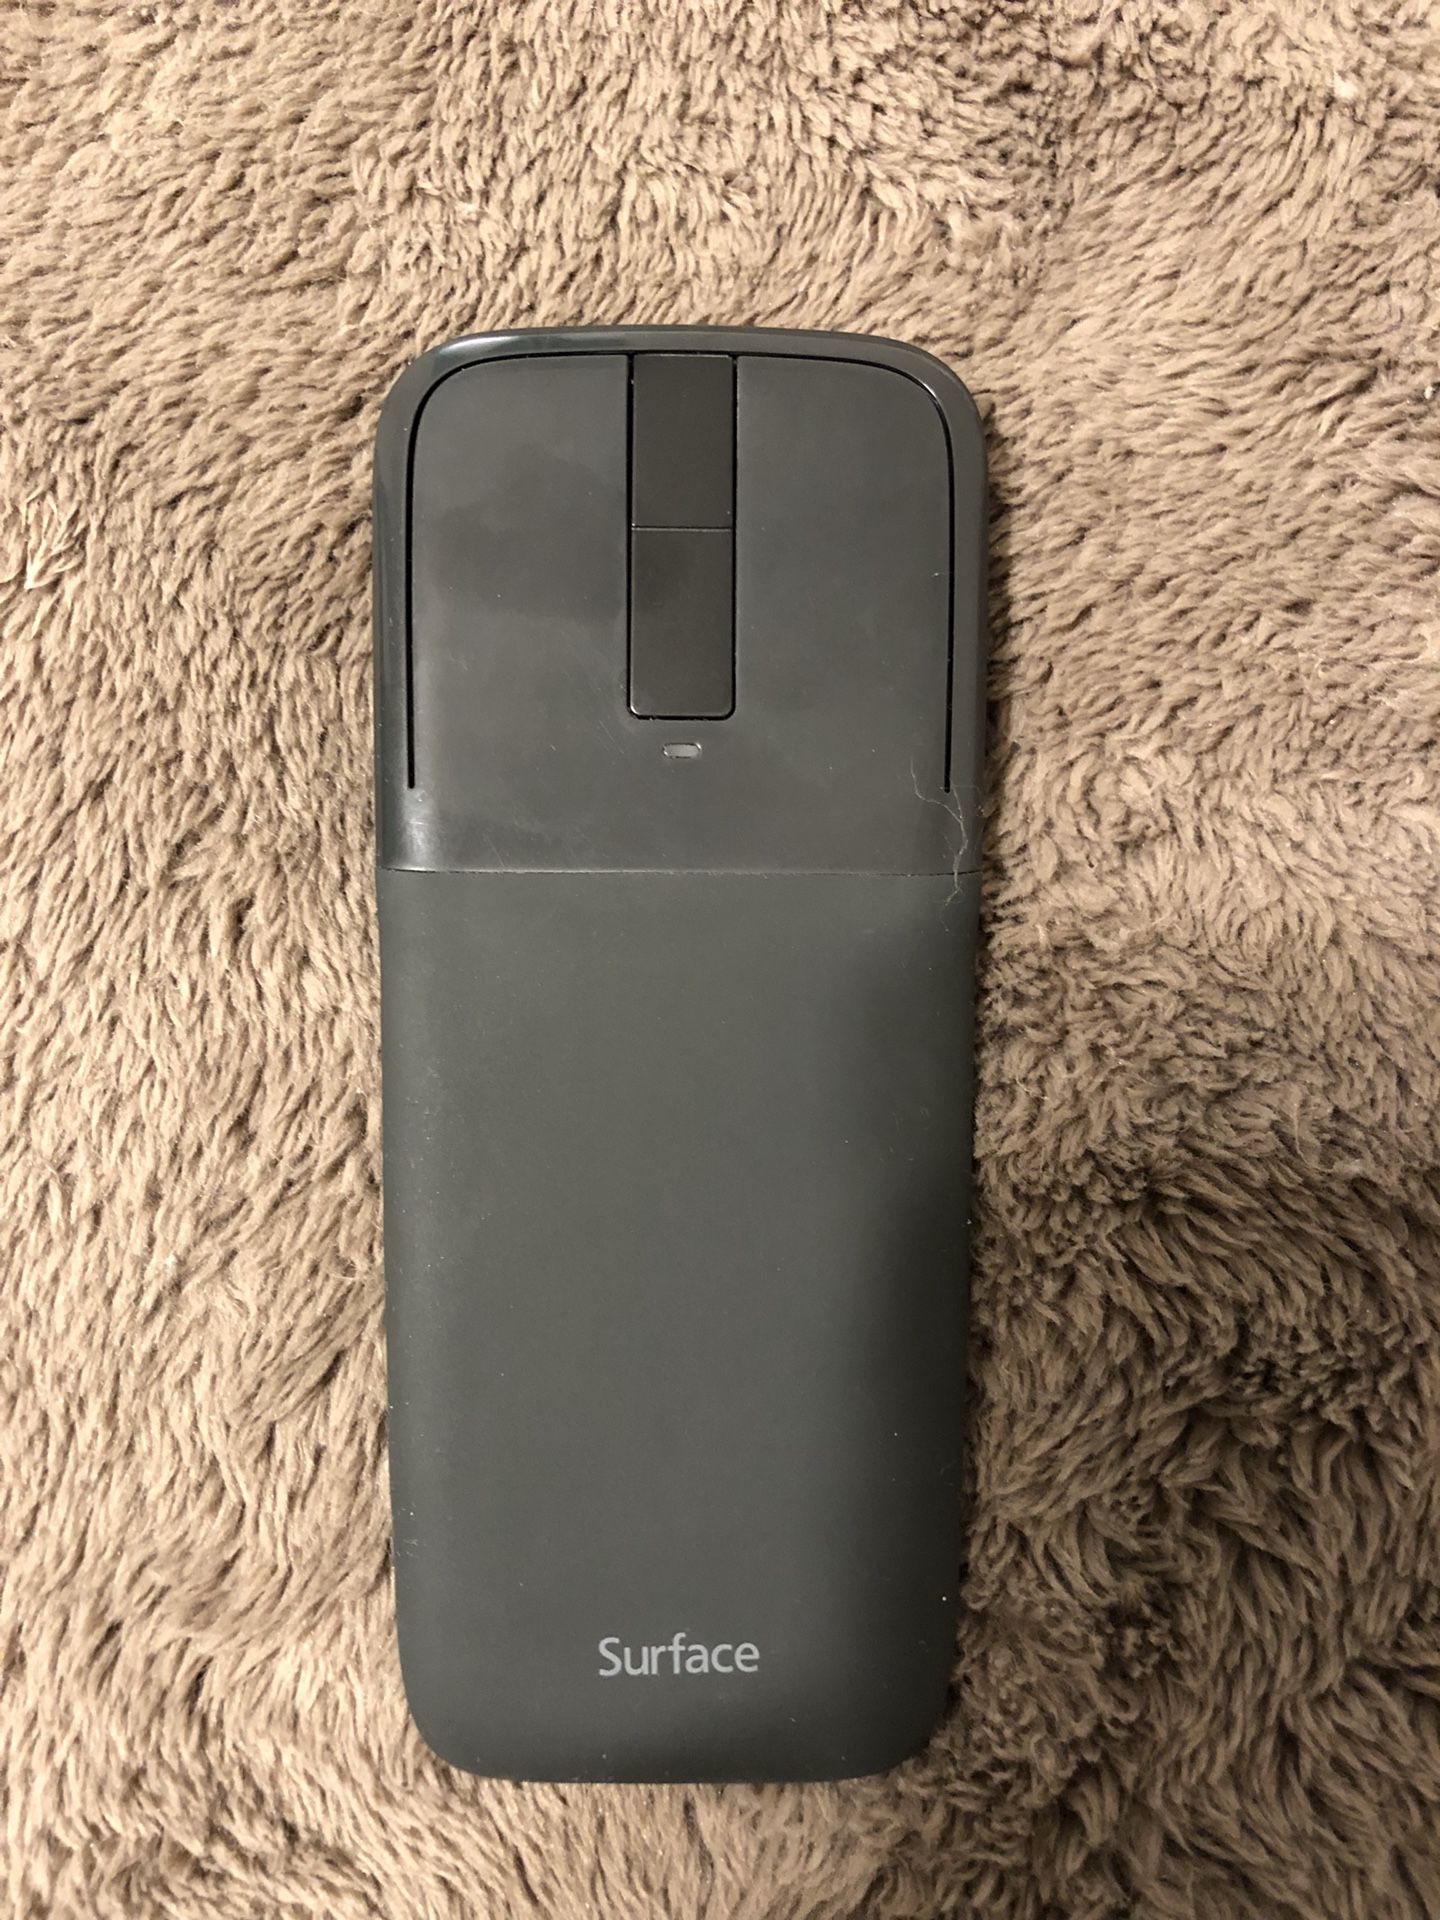 Microsoft Surface Arc Wireless Mouse